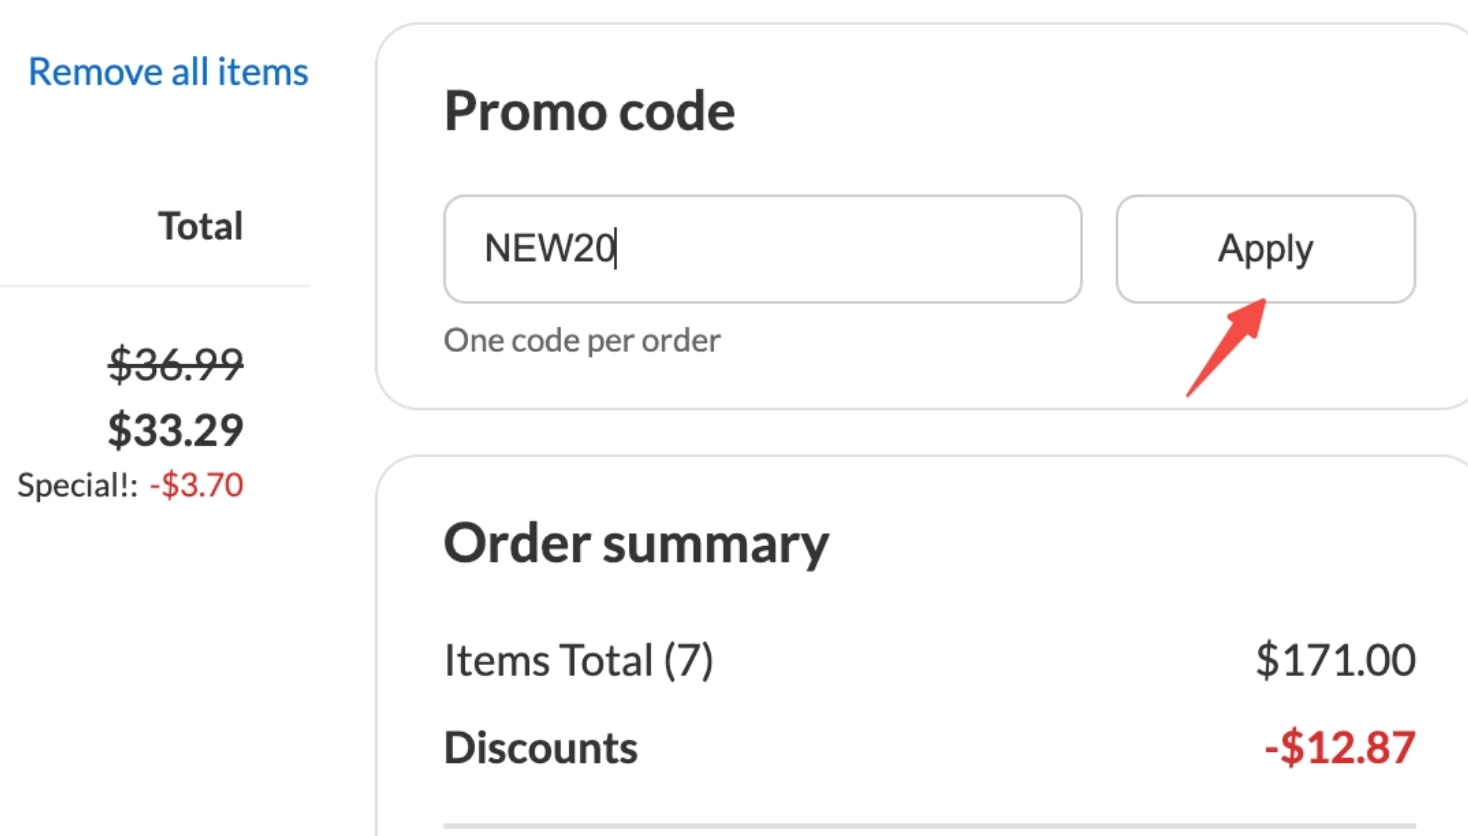 Step 3: When checking out at ptevoucher.com.au, paste the discount code into the specified promotional code box.